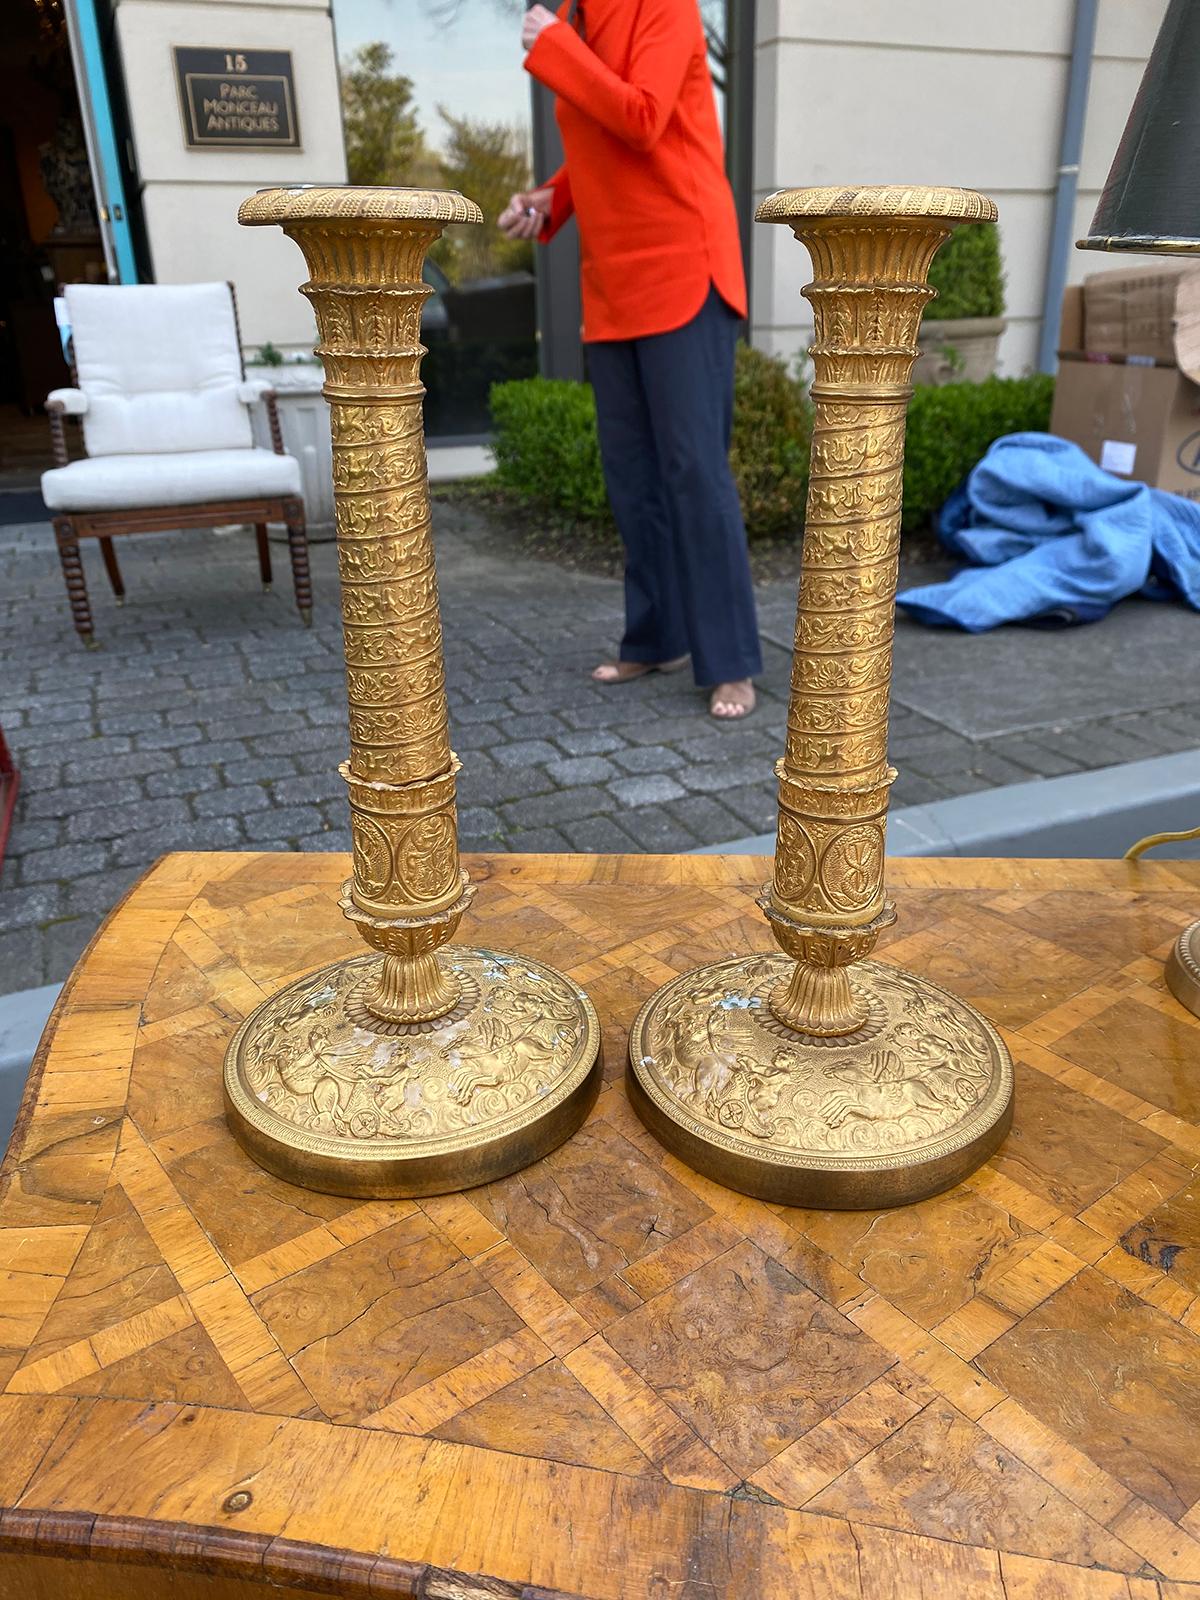 Pair of 19th century French Empire Charles X gilt candlesticks. Great detail.